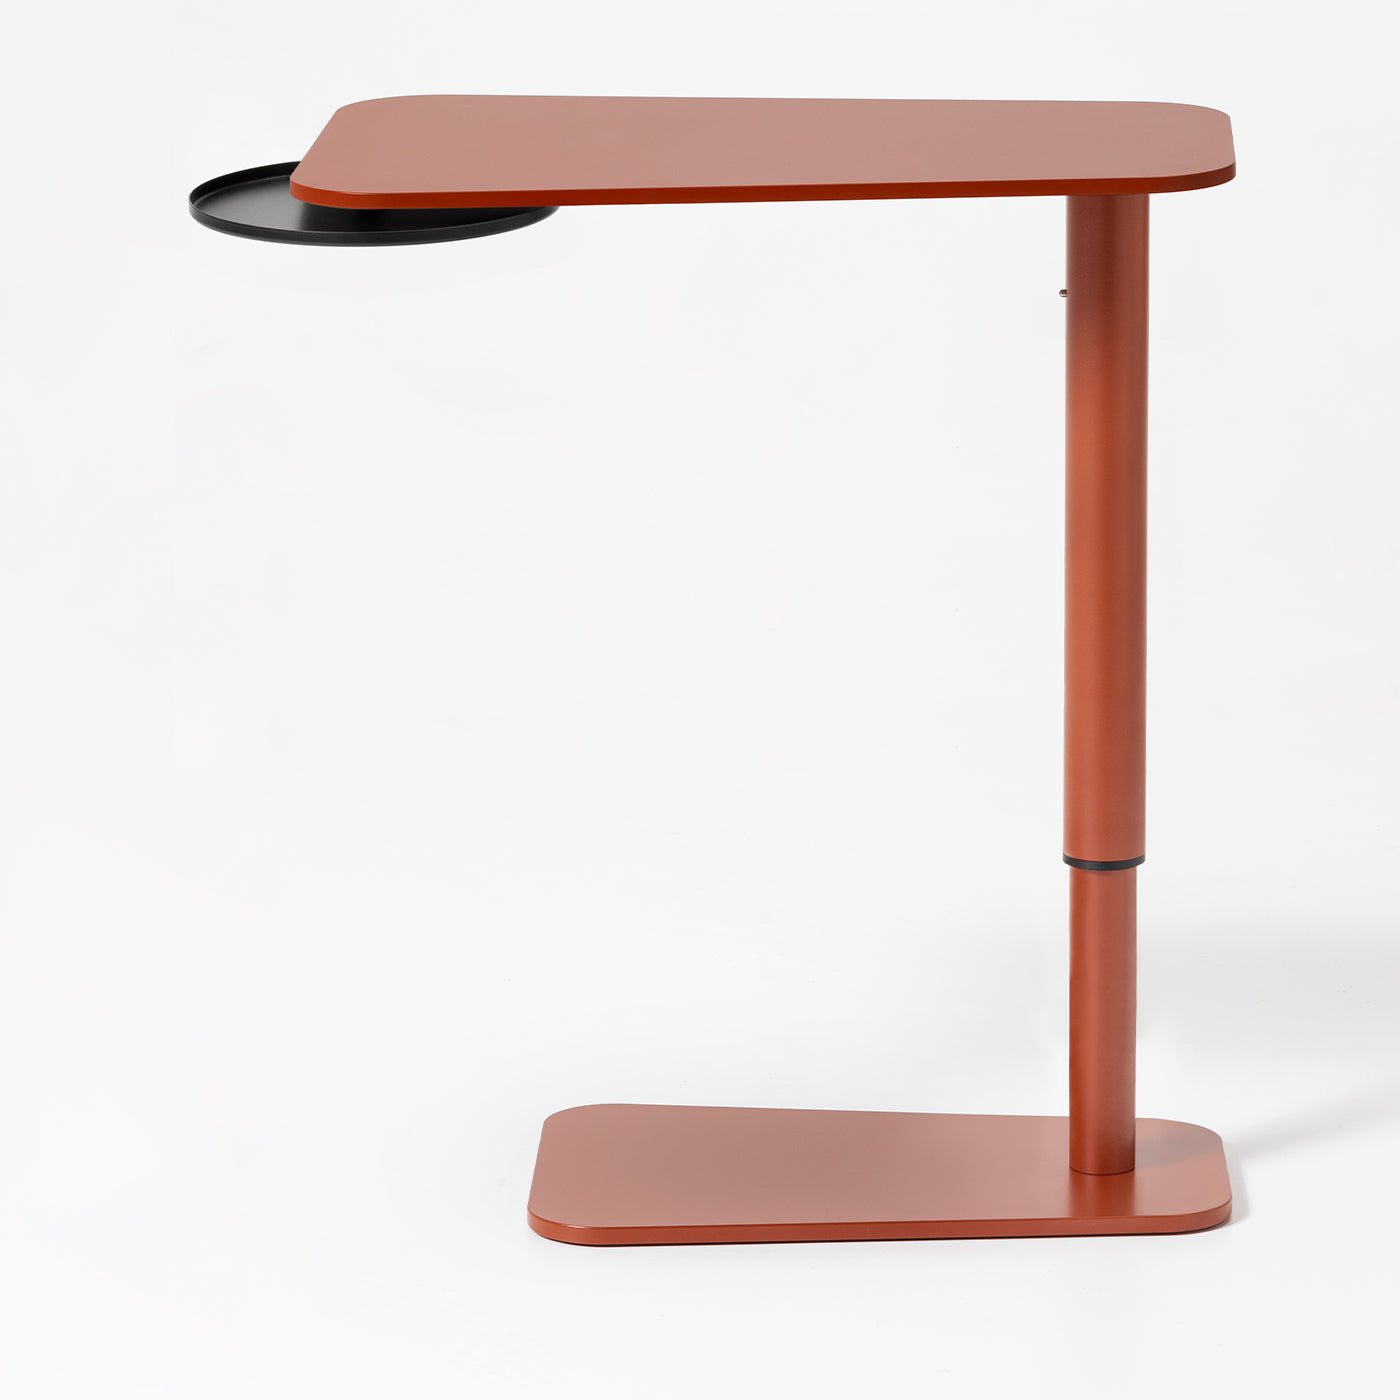 0130 Jens Red Side Table by Massimo Broglio - Alternative view 1